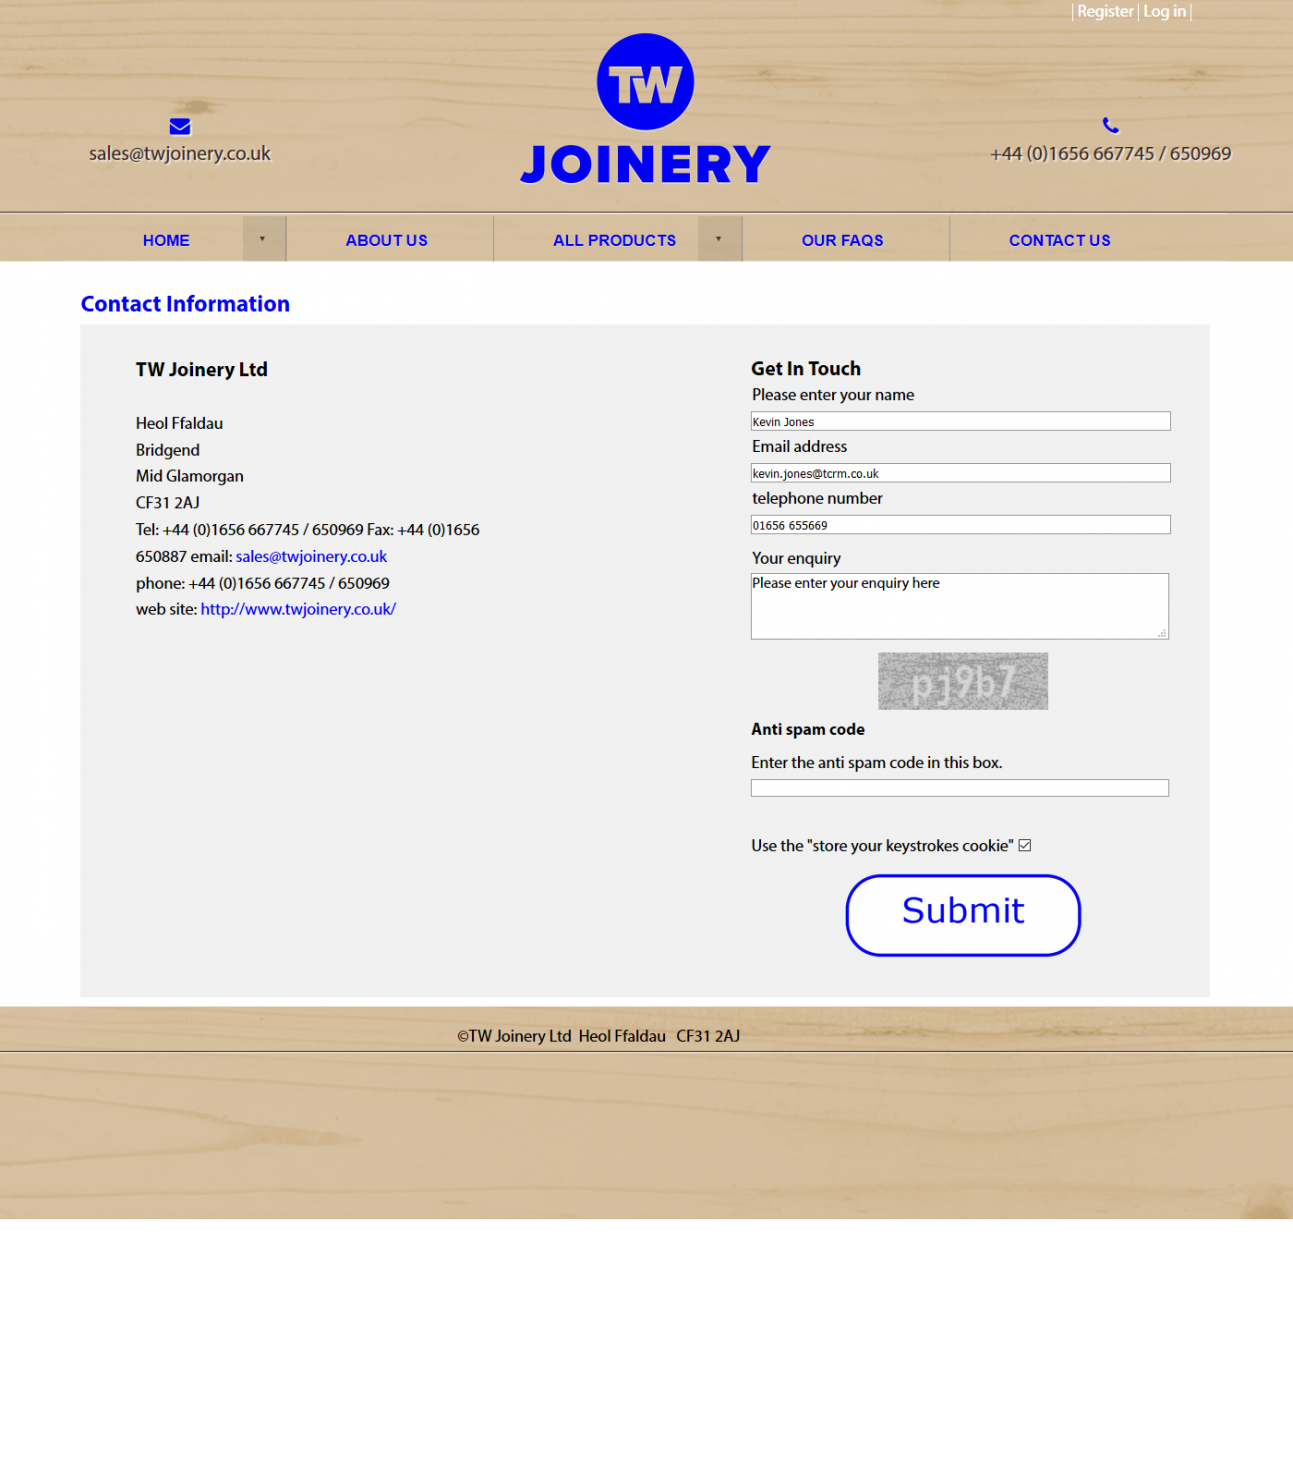 An image from TW Joinery 